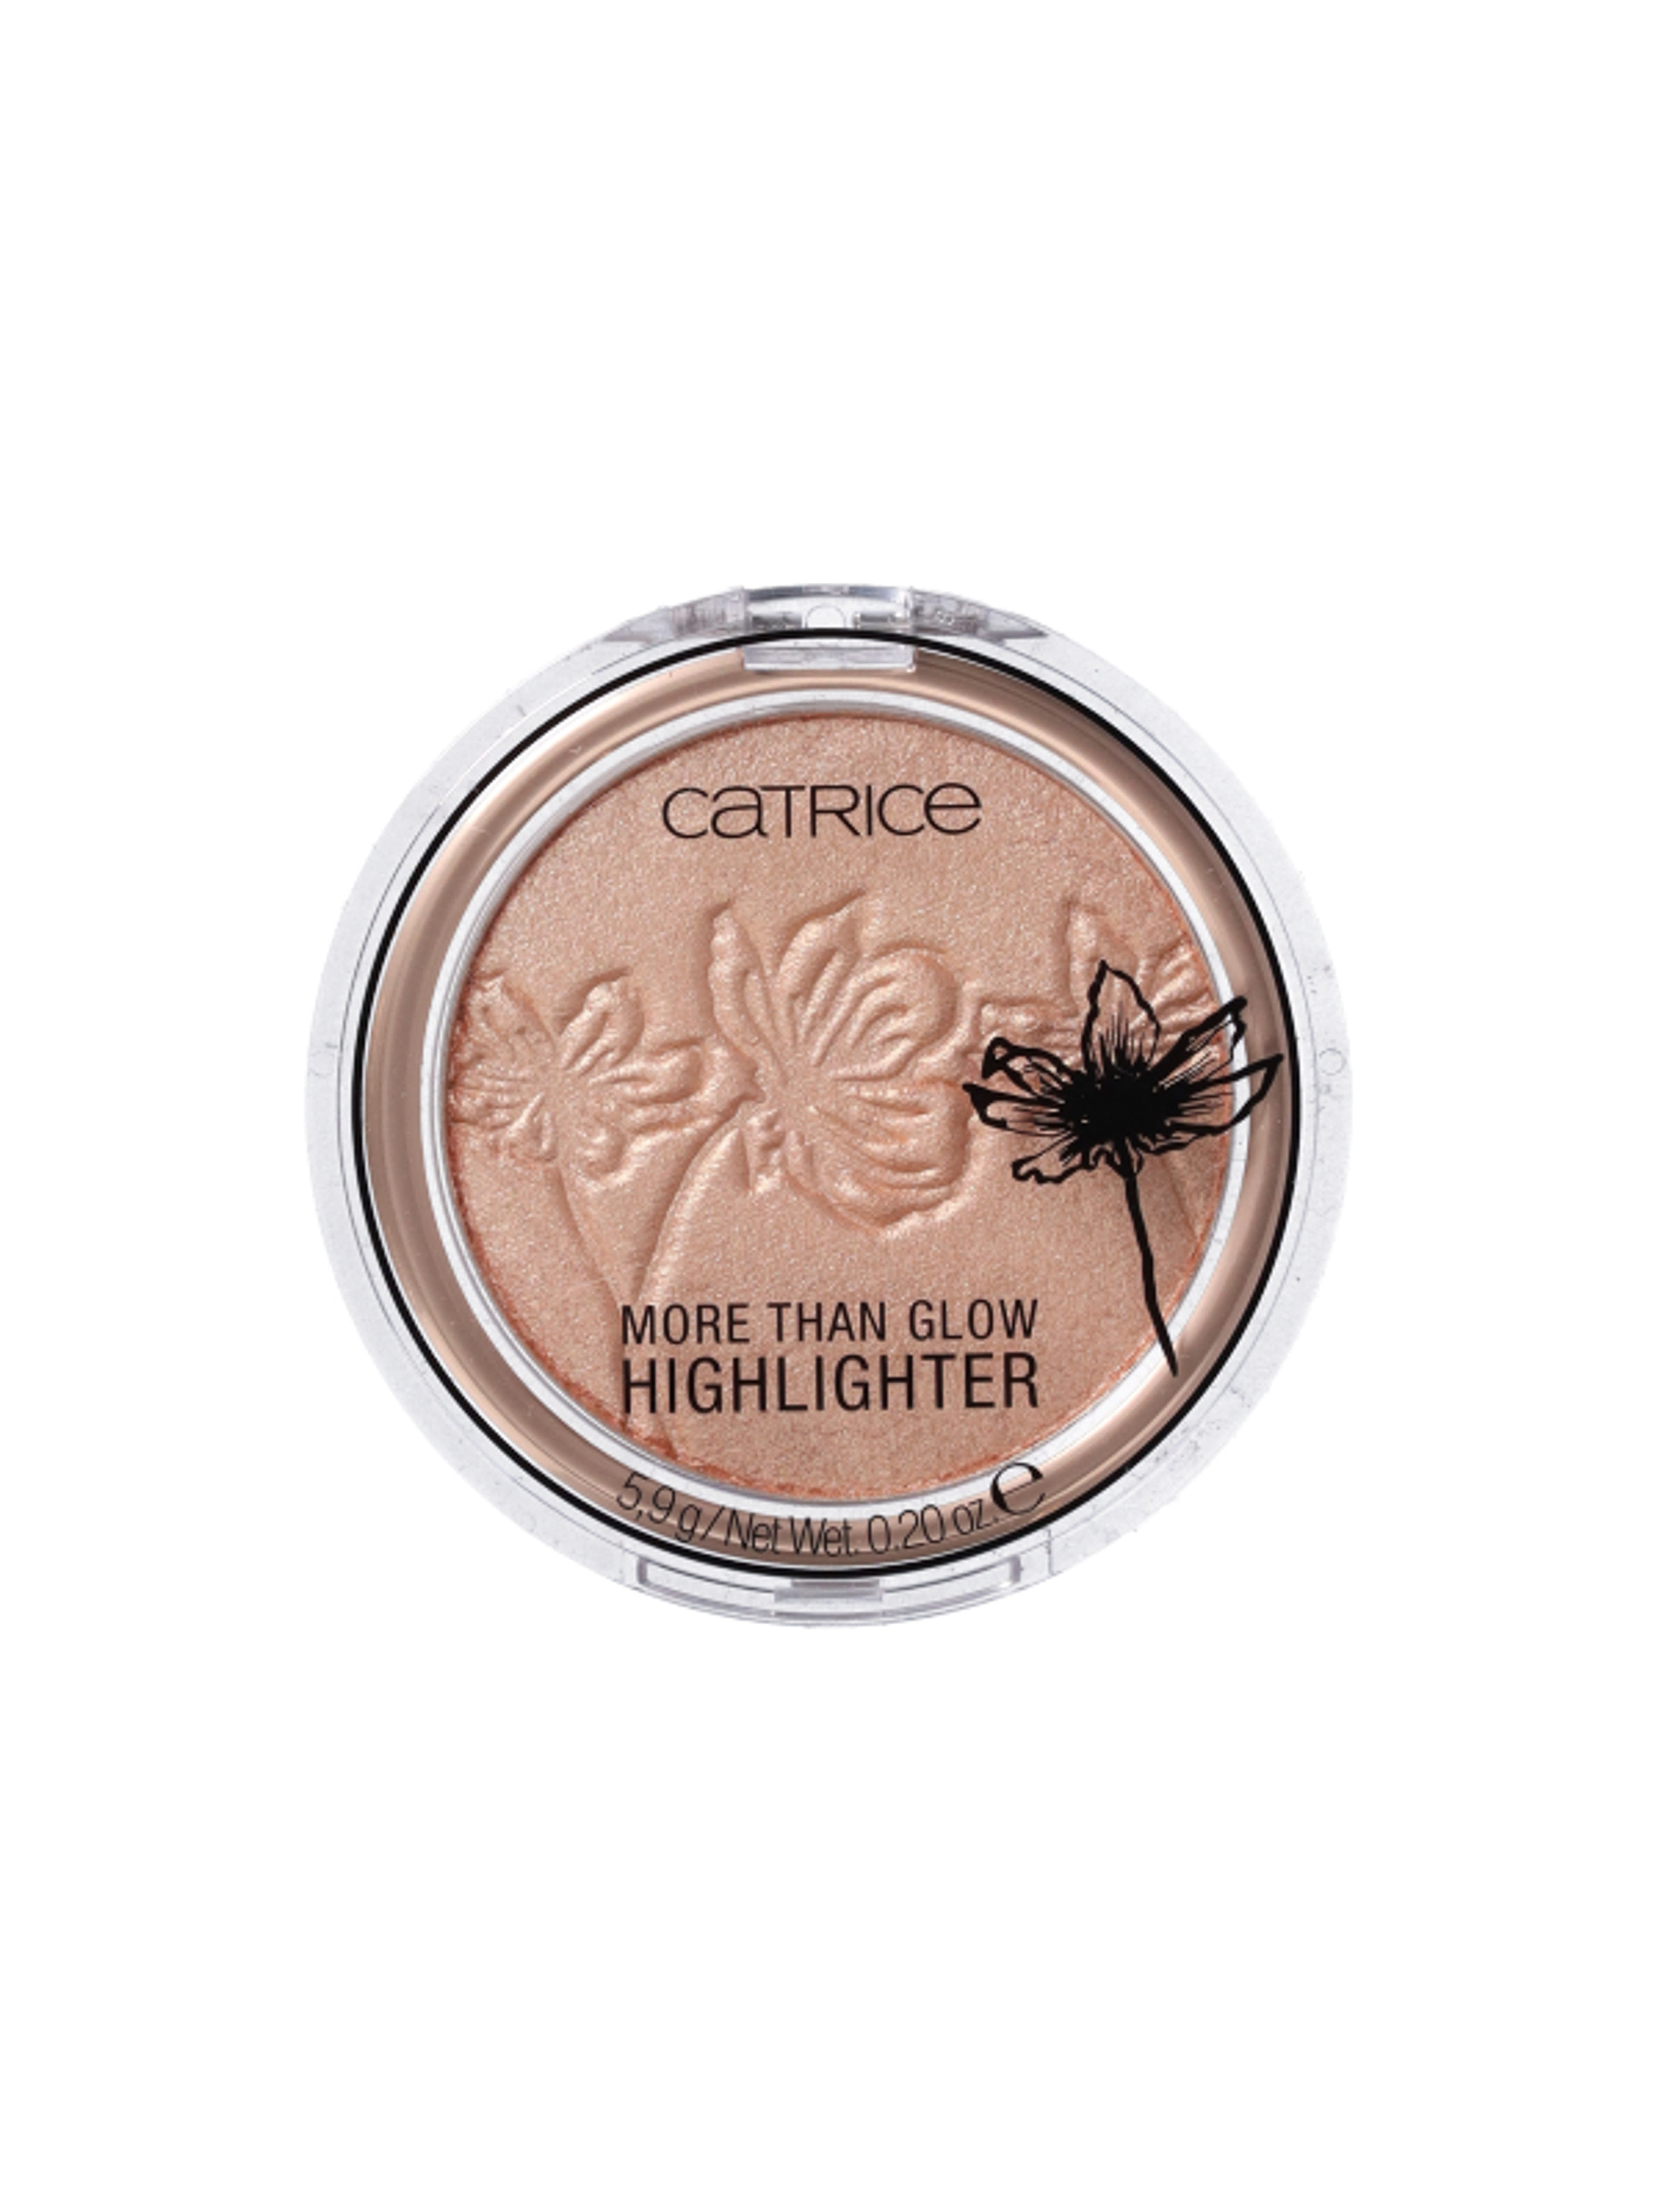 Catrice highlighter more than glow /030 - 1 db